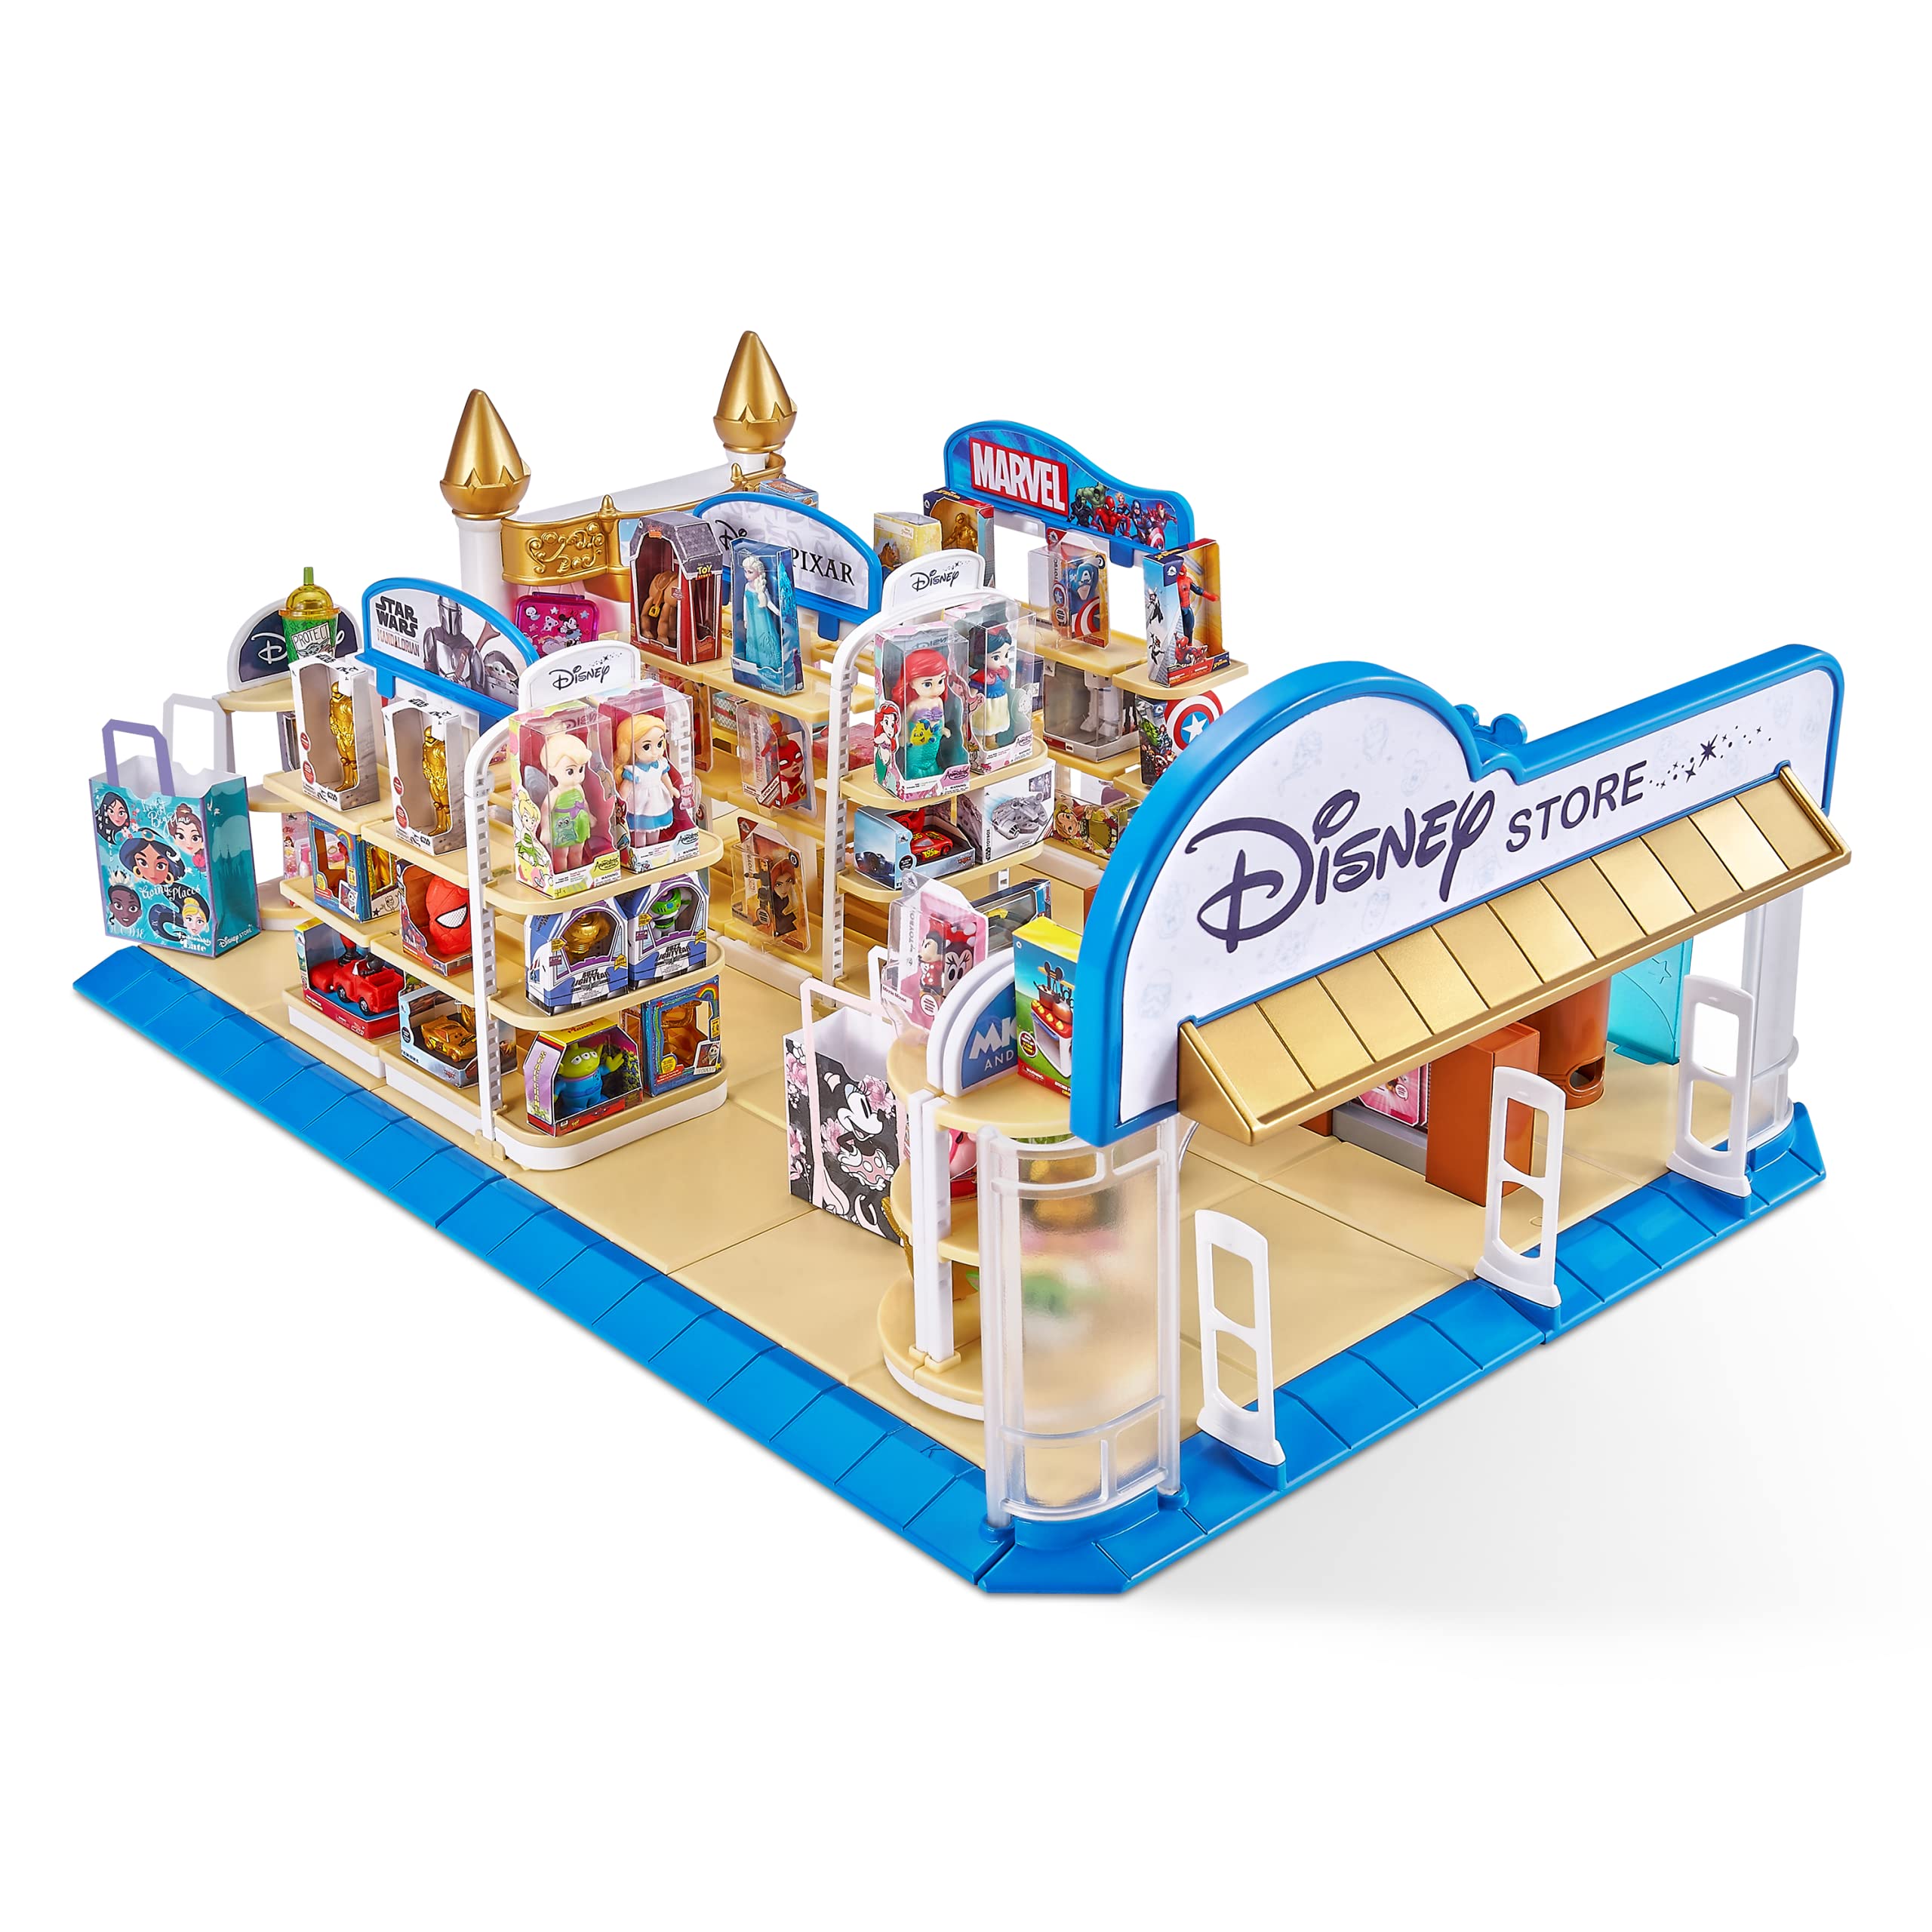 5 Surprise Mini Brands Disney Toy Store Playset by Zuru - Includes 5 Exclusive Mystery Mini's, Store and Display Mini Collectibles for Kids, Teens, and Adults